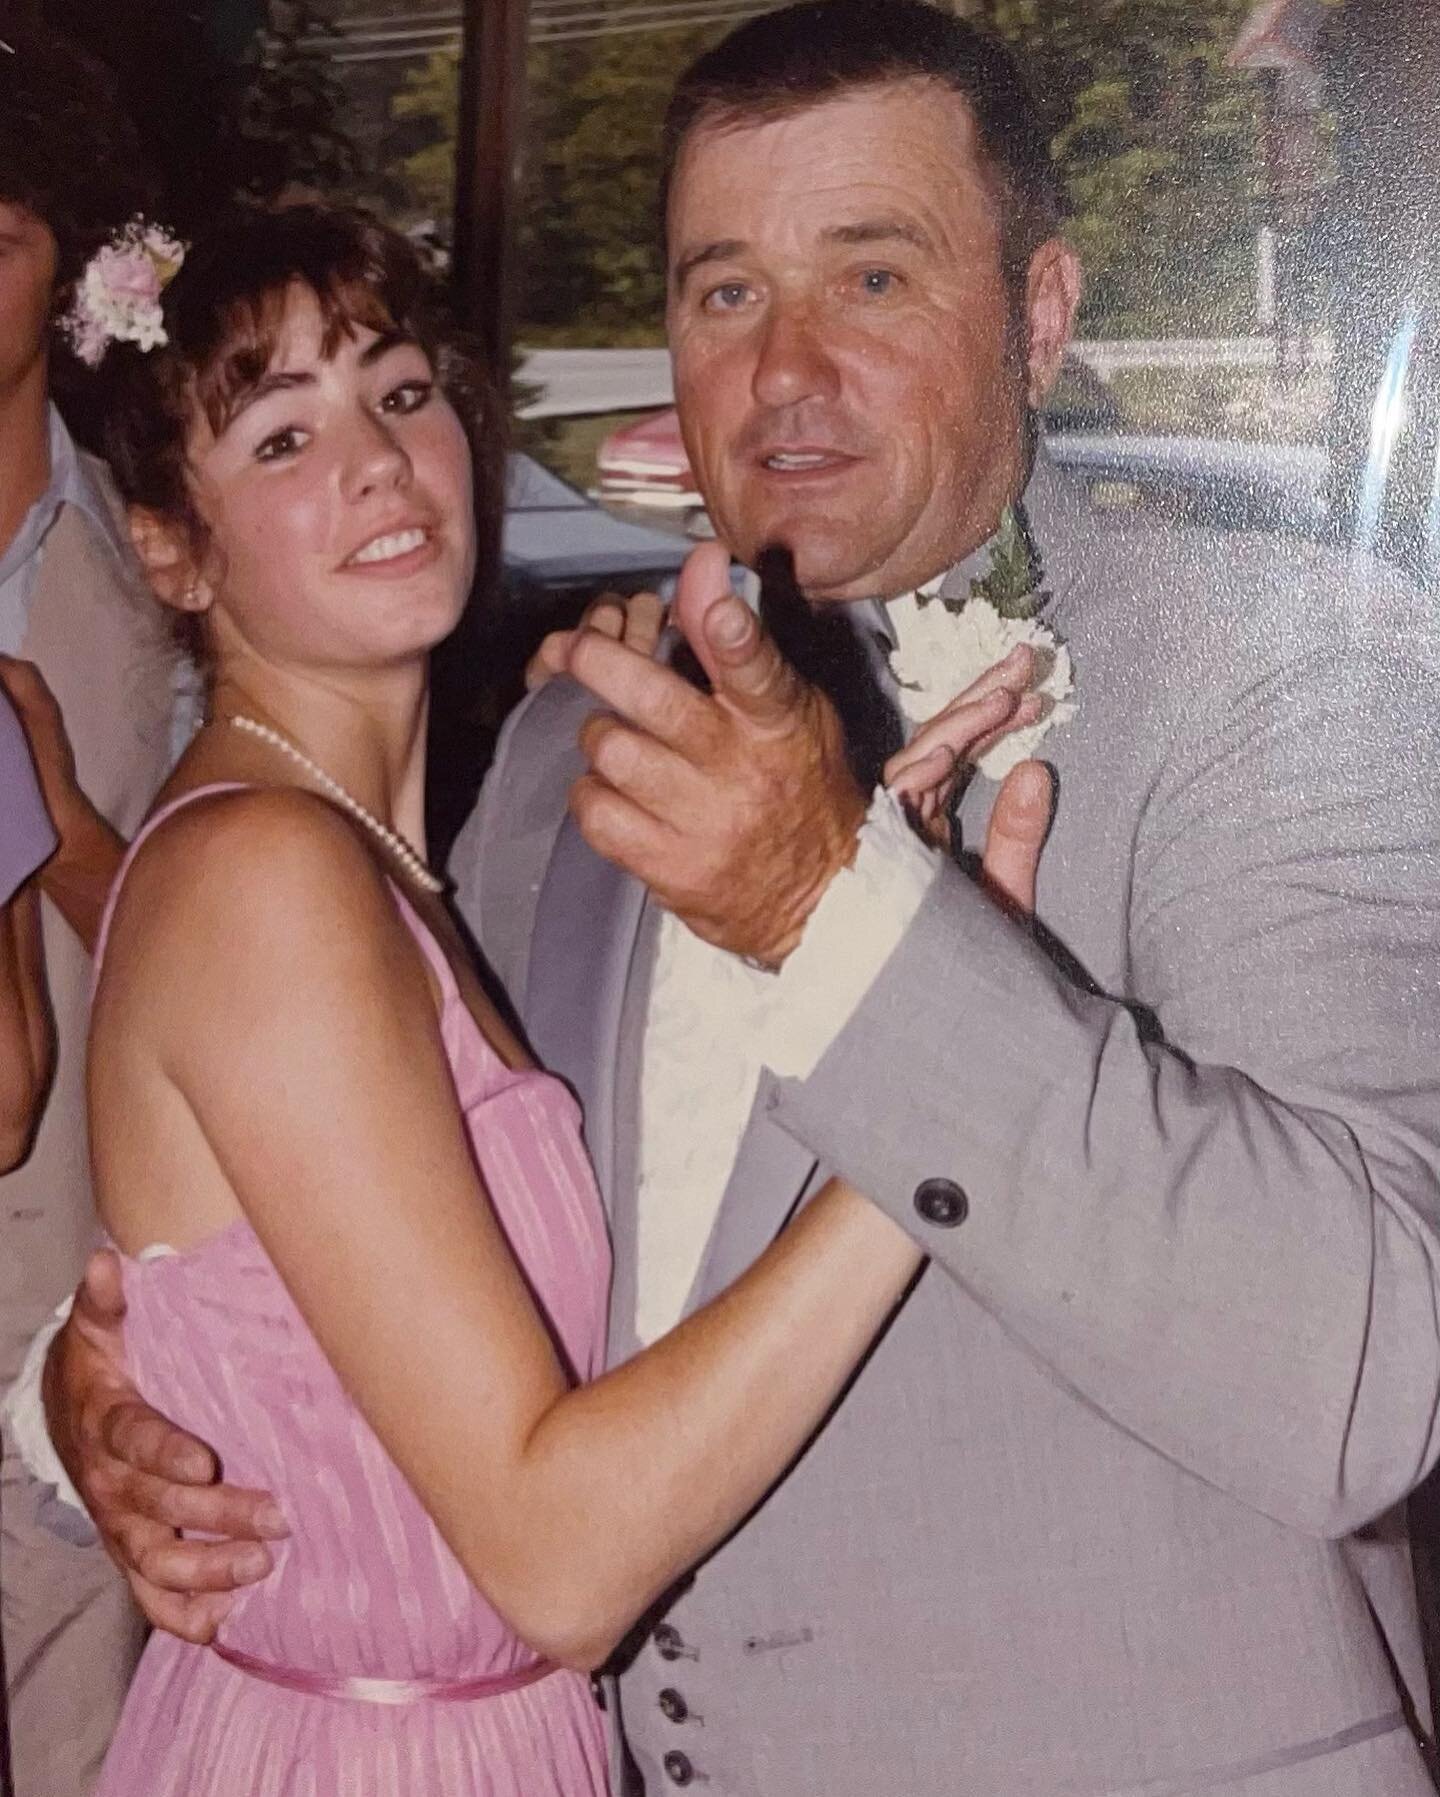 Rest in peace to my amazing Uncle Larry - love you and please hug Mom, Aunt Patsy and Gammy in heaven ❤️ photo- circa 1980s at Laura&rsquo;s wedding